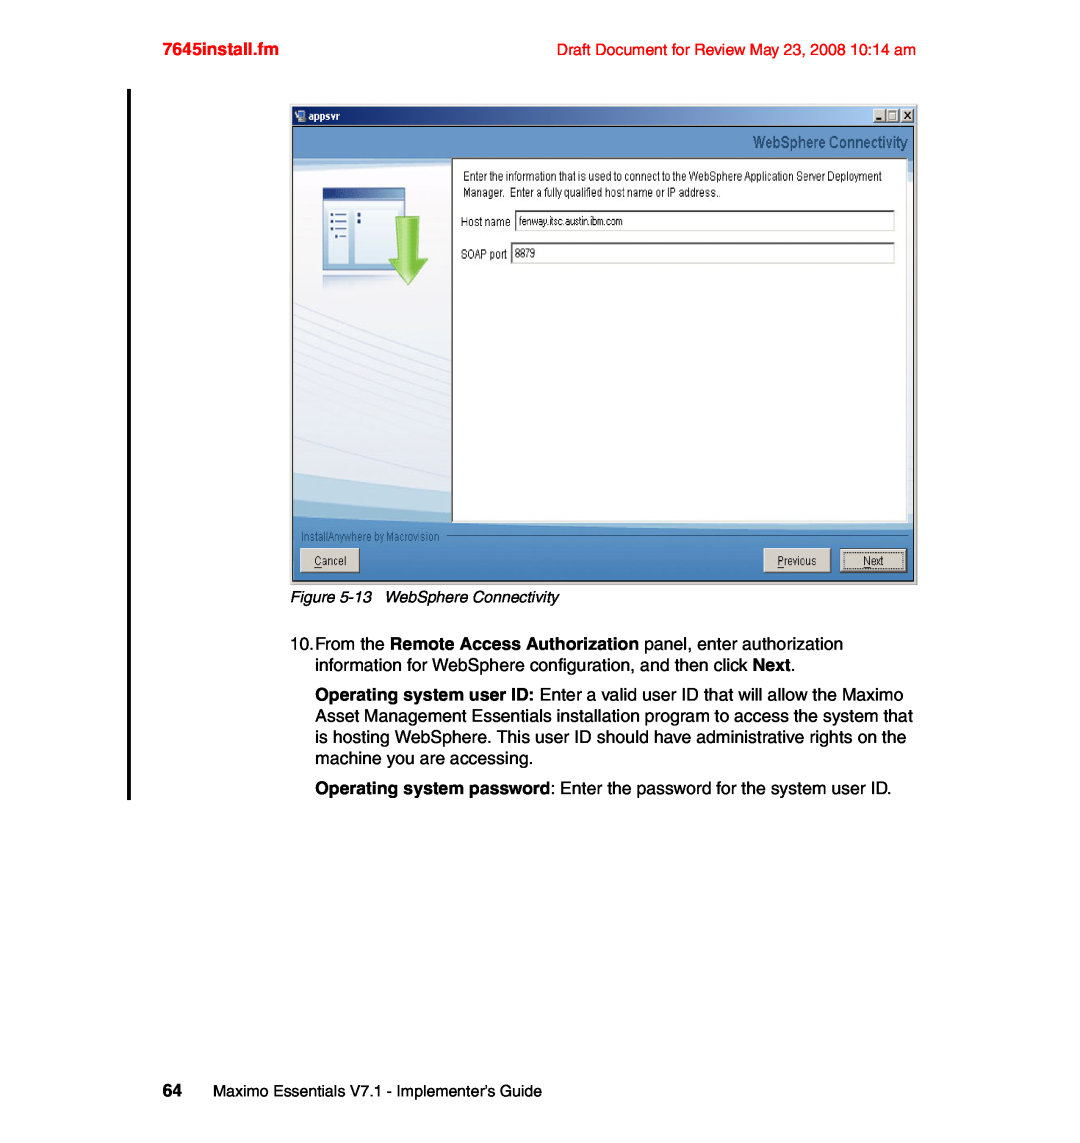 IBM SG24-7645-00 manual 7645install.fm, 13WebSphere Connectivity, 64Maximo Essentials V7.1 - Implementer’s Guide 